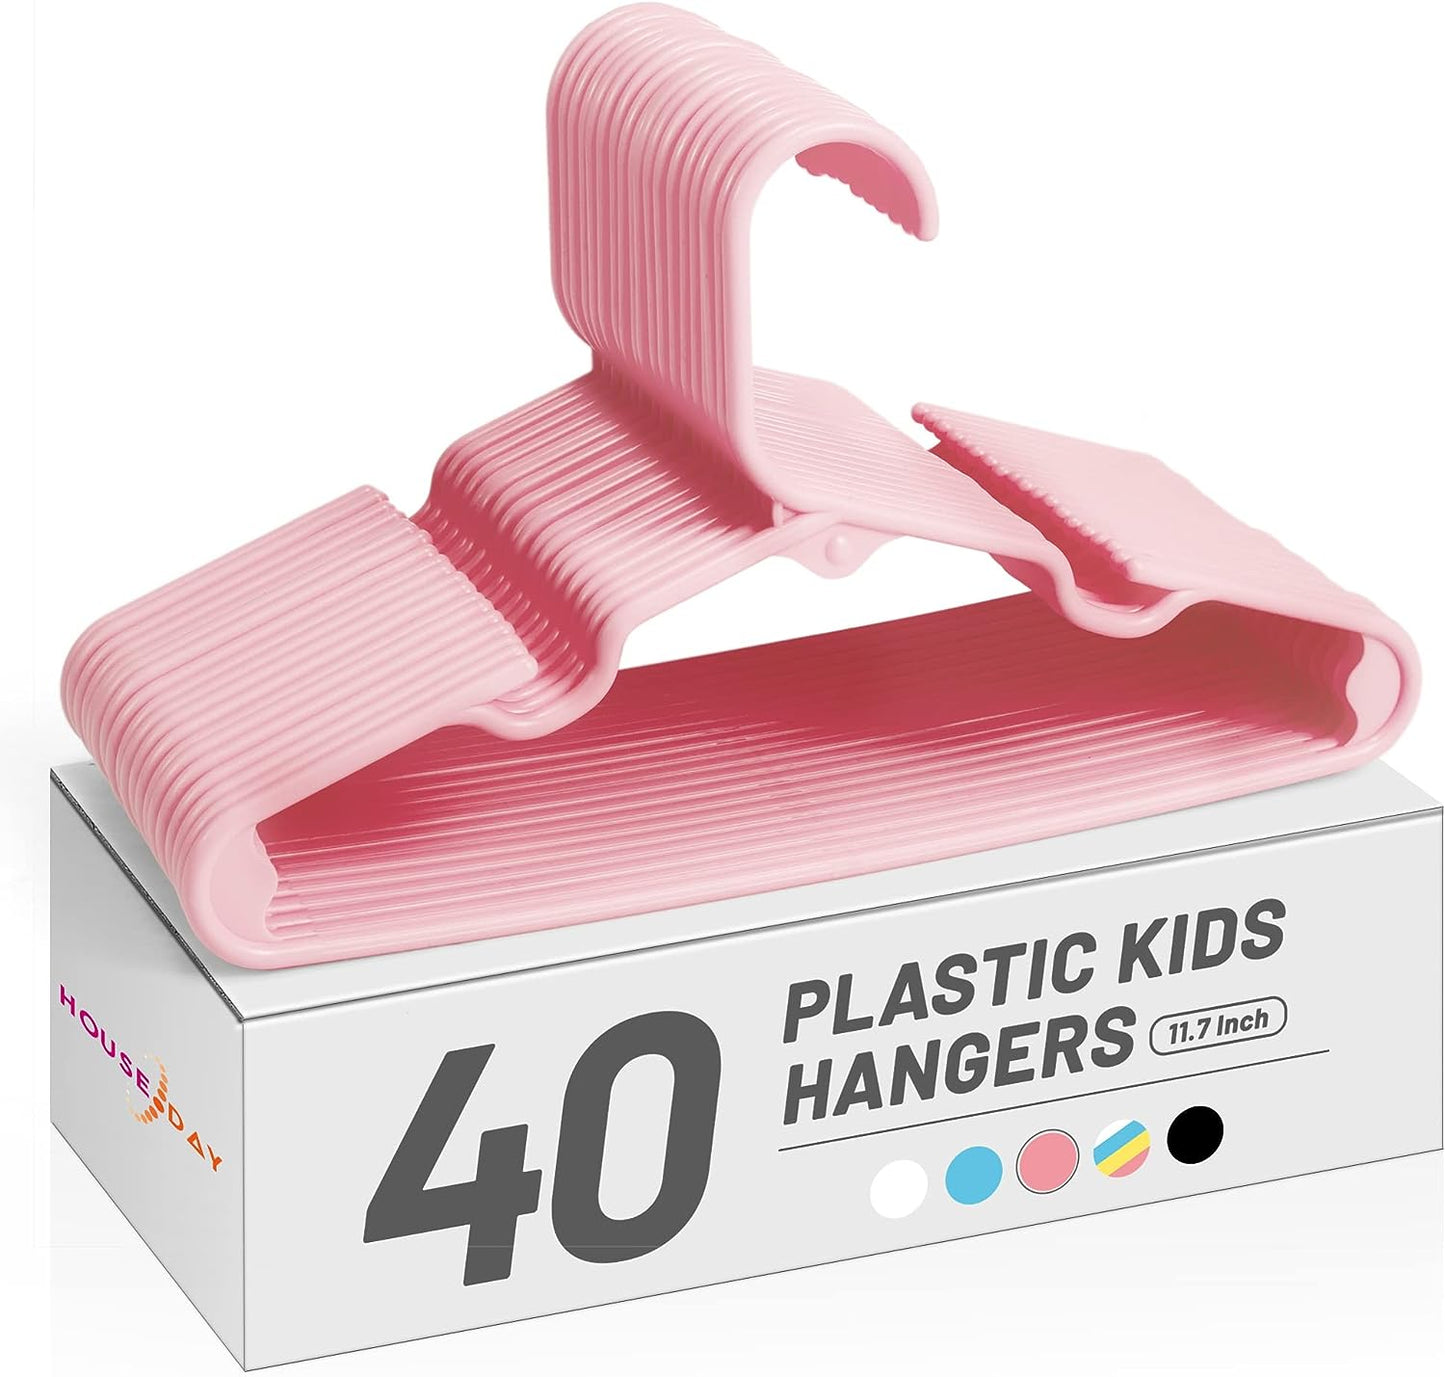 HOUSE DAY 11.7x6.5 Inch Kids Plastic Hangers Baby Hangers Pink 40 Pack